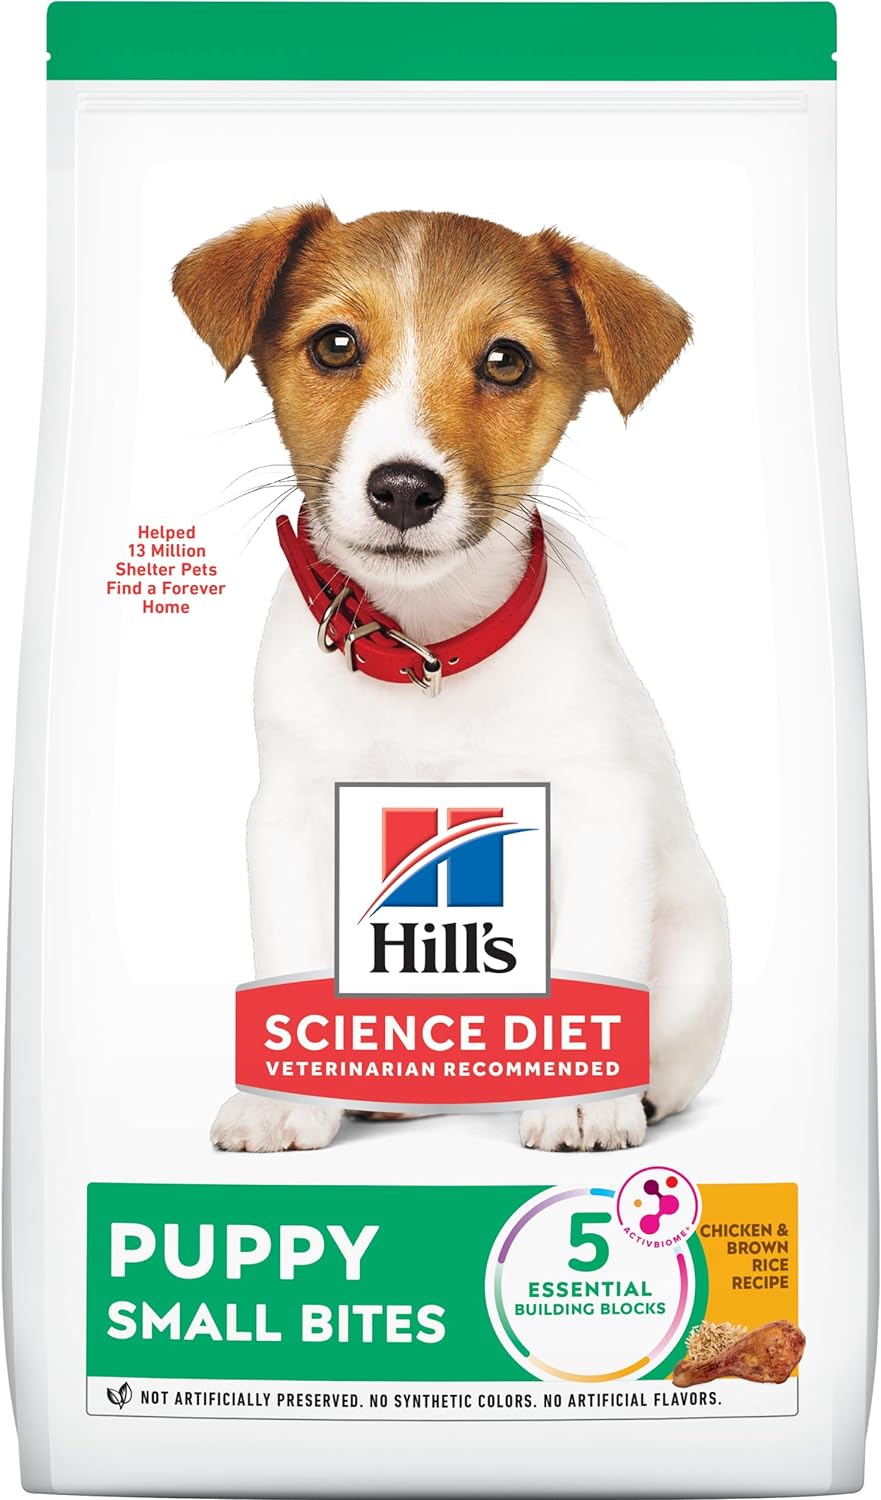 Hill’s Science Diet Puppy Small Bites Chicken & Barley Recipe Dry Dog Food – Gallery Image 1